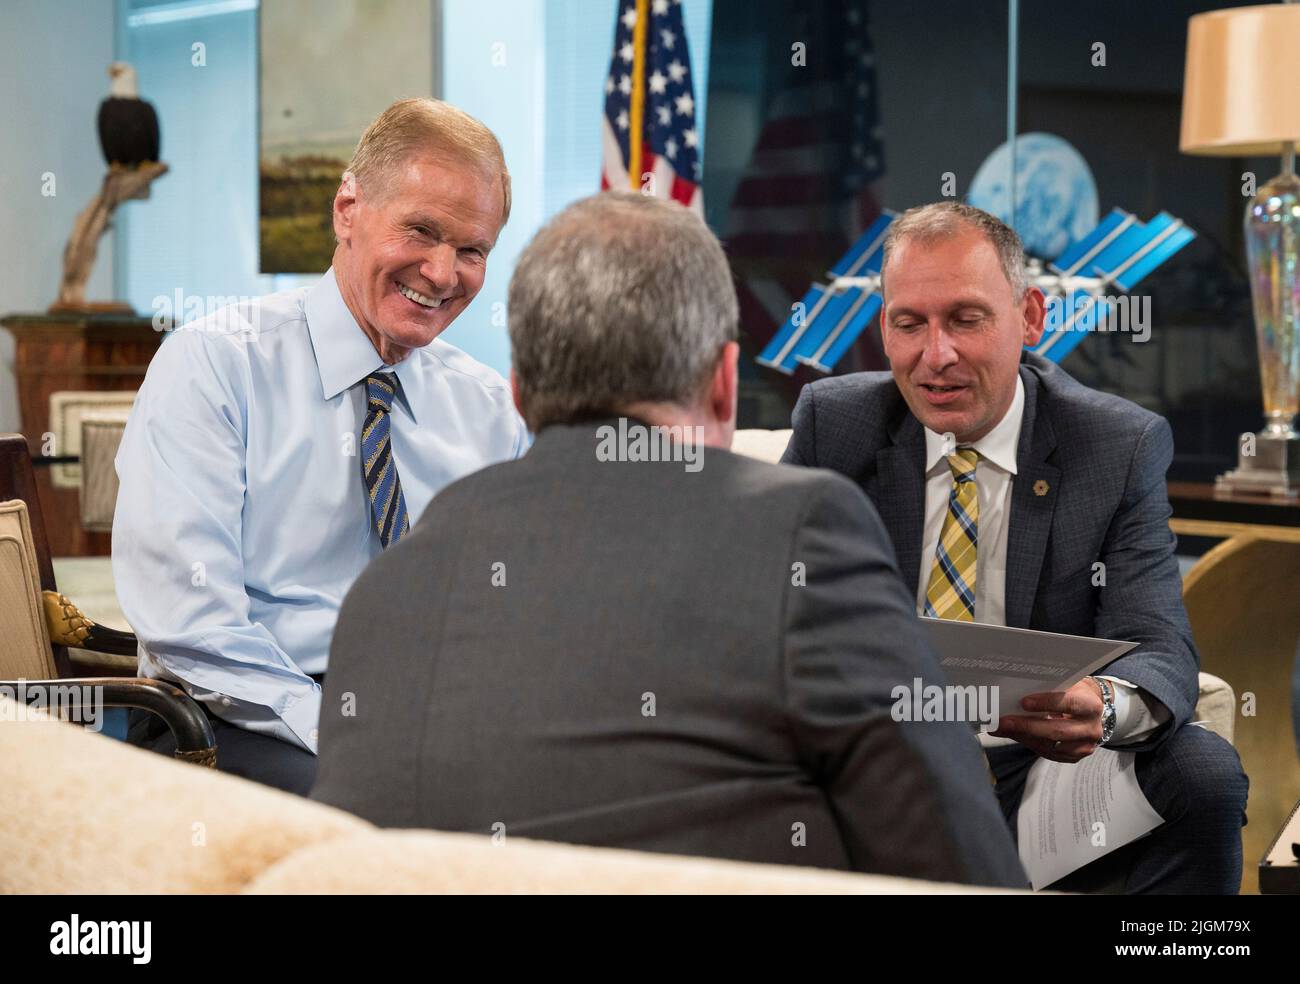 NASA Administrator Bill Nelson, left, and Associate Administrator for NASAs Science Mission Directorate, Thomas Zurbuchen, right, speak with Webb project scientist at the Space Telescope Science Institute, Klaus Pontoppidan, center, after being shown the first full-color images from NASAs James Webb Space Telescope in a preview meeting, Monday, July 11, 2022, at the Mary W. Jackson NASA Headquarters building in Washington. The first images and spectroscopic data from the worlds largest and most powerful space telescope, set to be released July 11 and 12, will demonstrate Webb at its full po Stock Photo